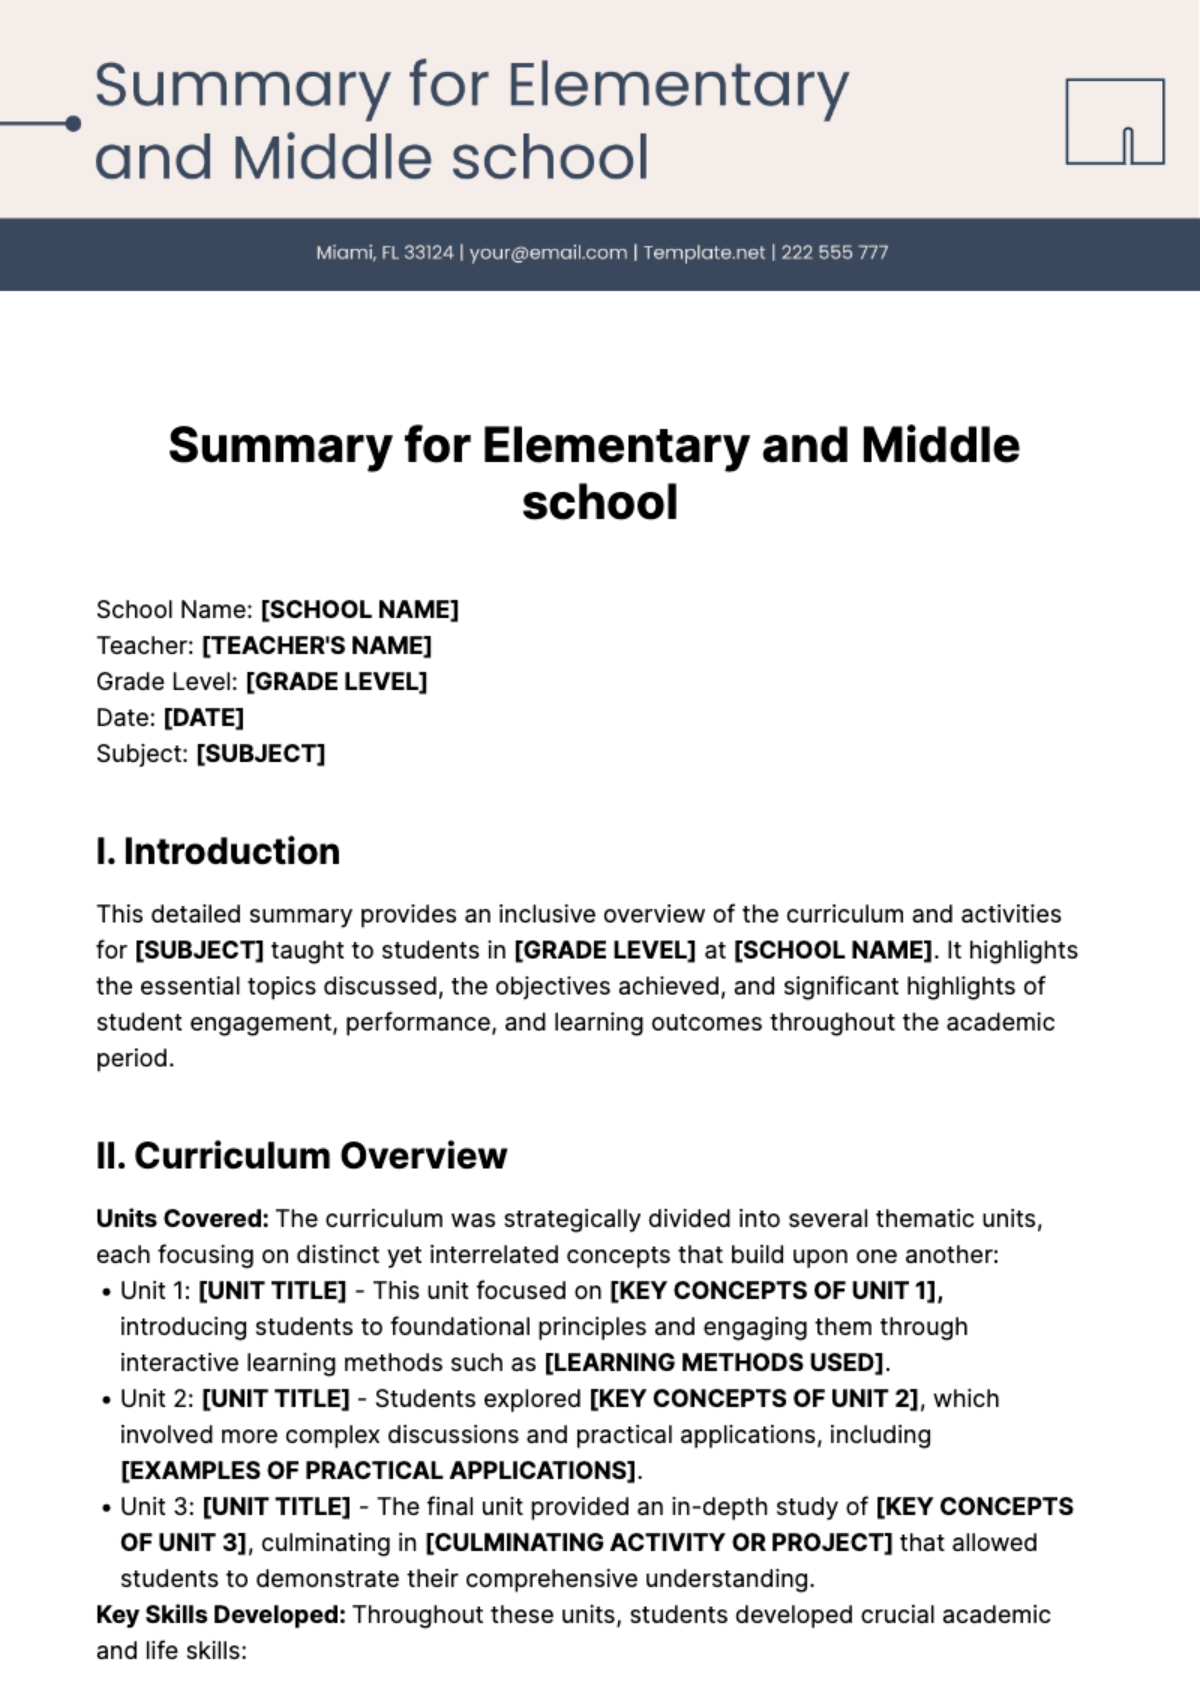 Free Summary for Elementary and Middle school Template